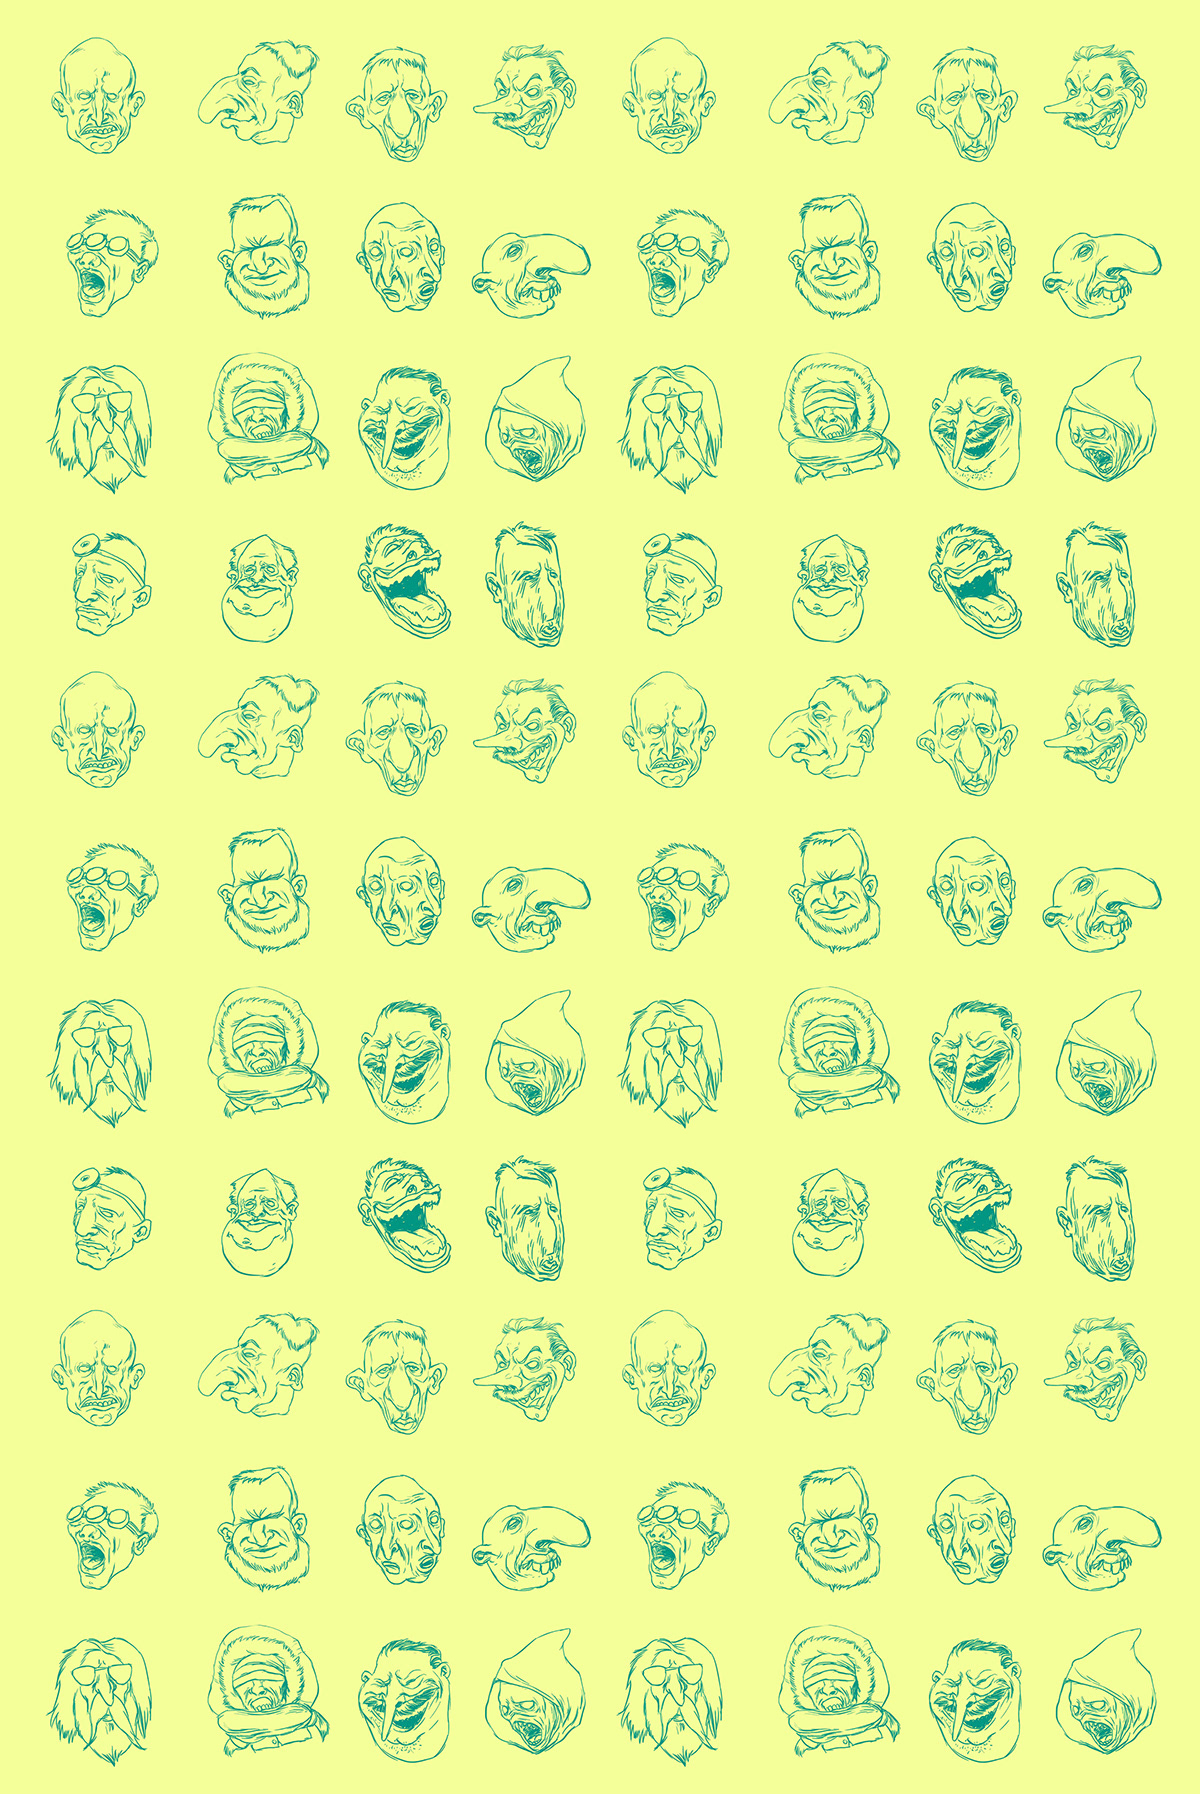 pattern illustrated characters faces